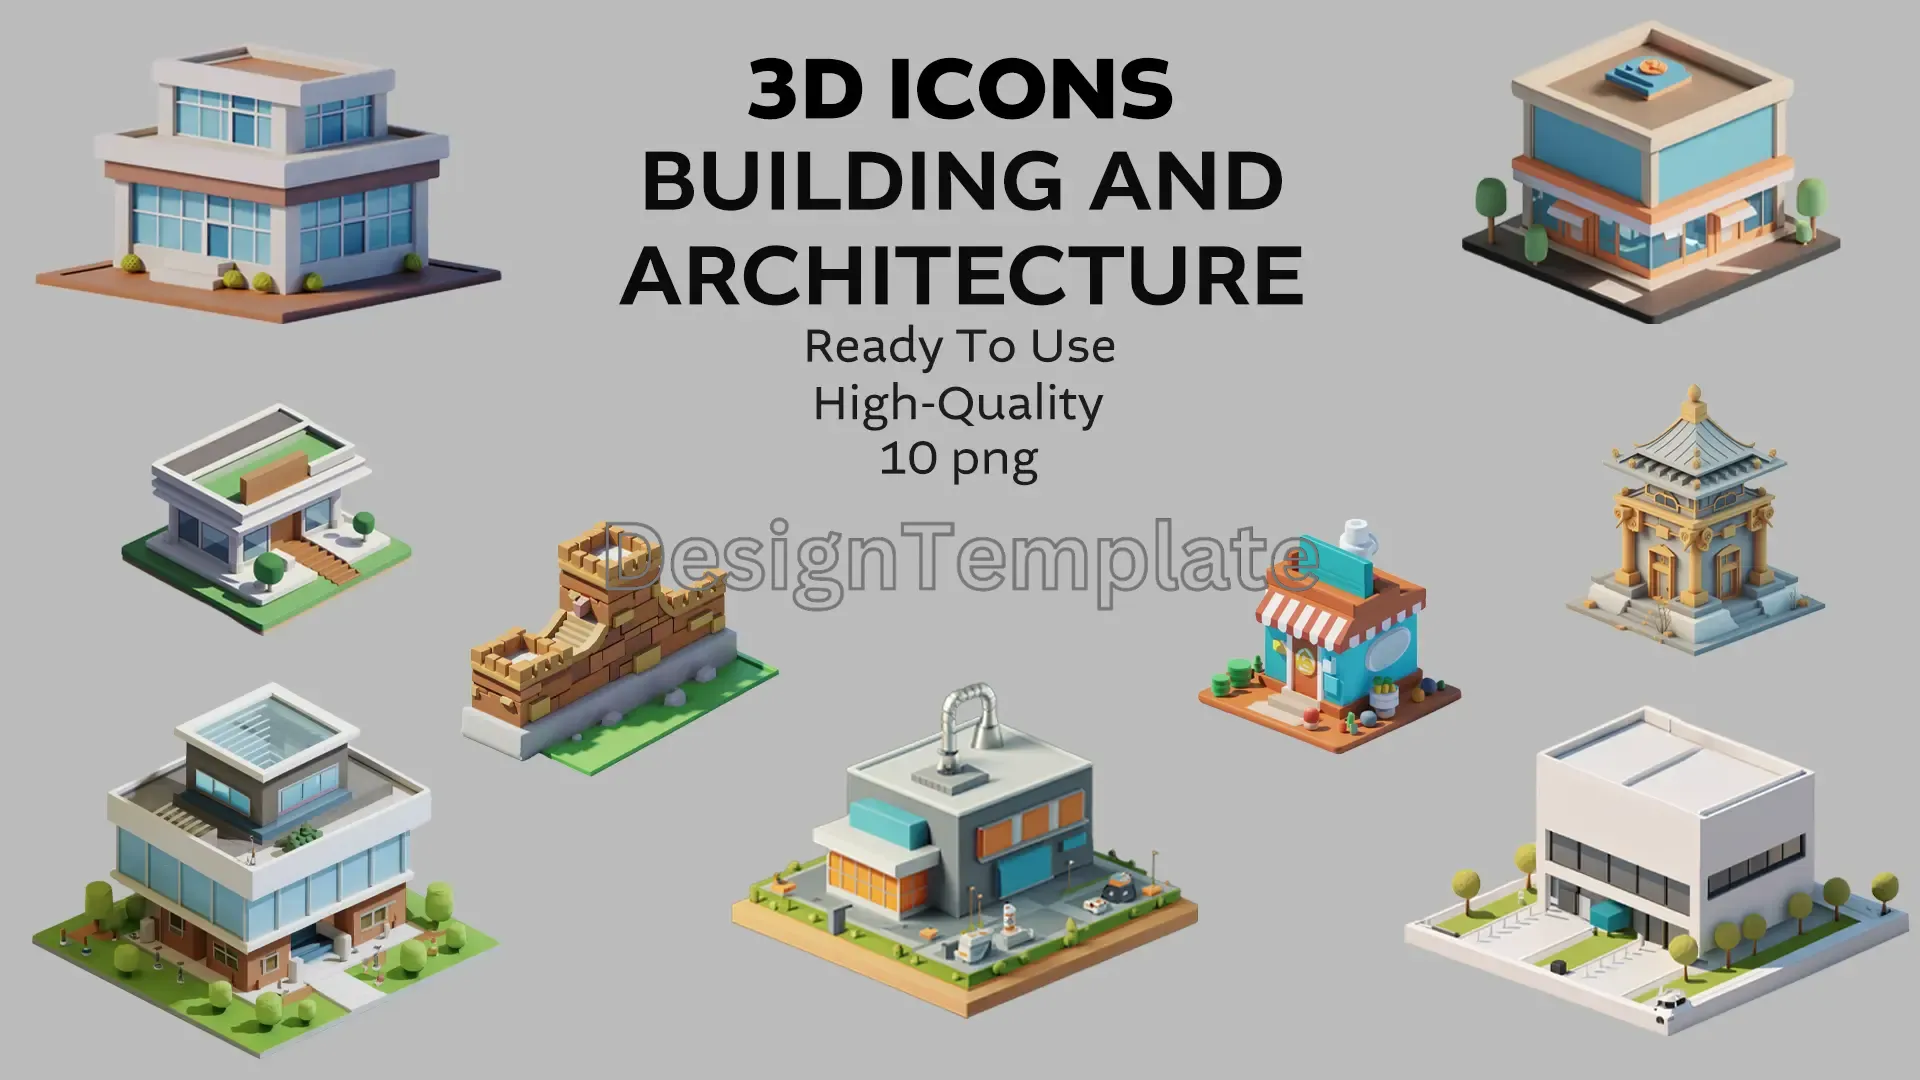 Architectural Wonders 3D Building Icons Collection image